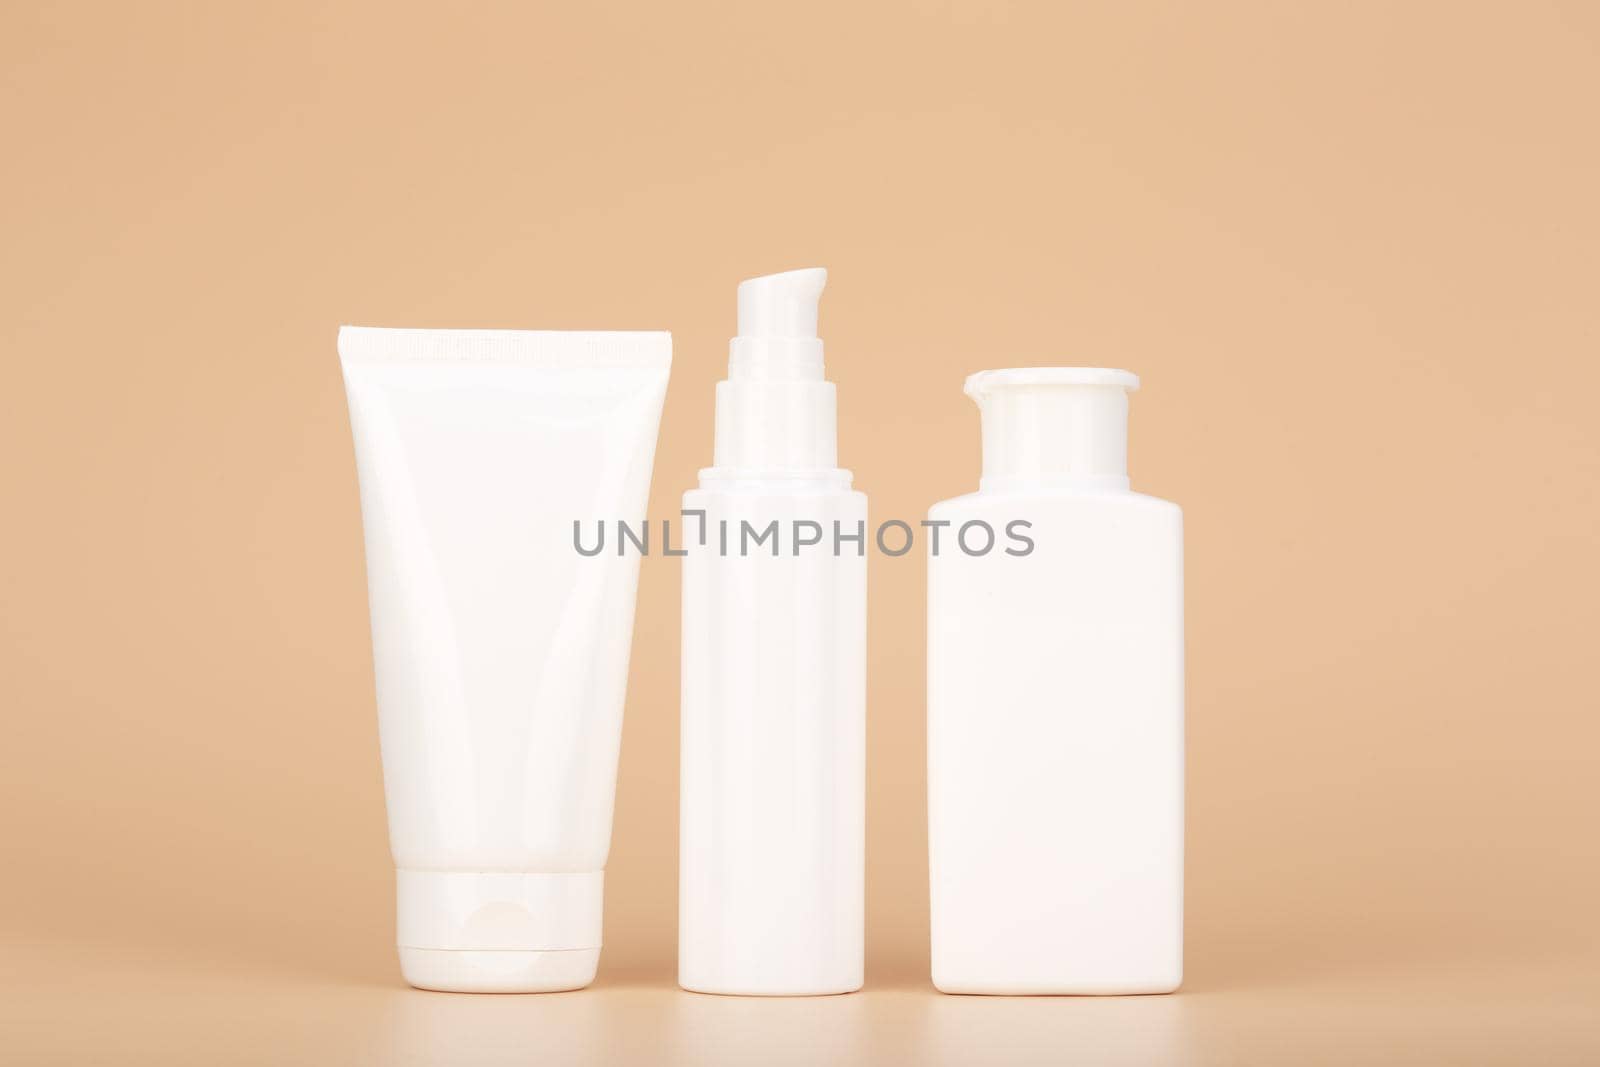 Set of white unbranded cosmetic tubes for face and body care in a row against pastel beige background. Concept of organic, natural, eco friendly cosmetics and beauty products for daily skin care